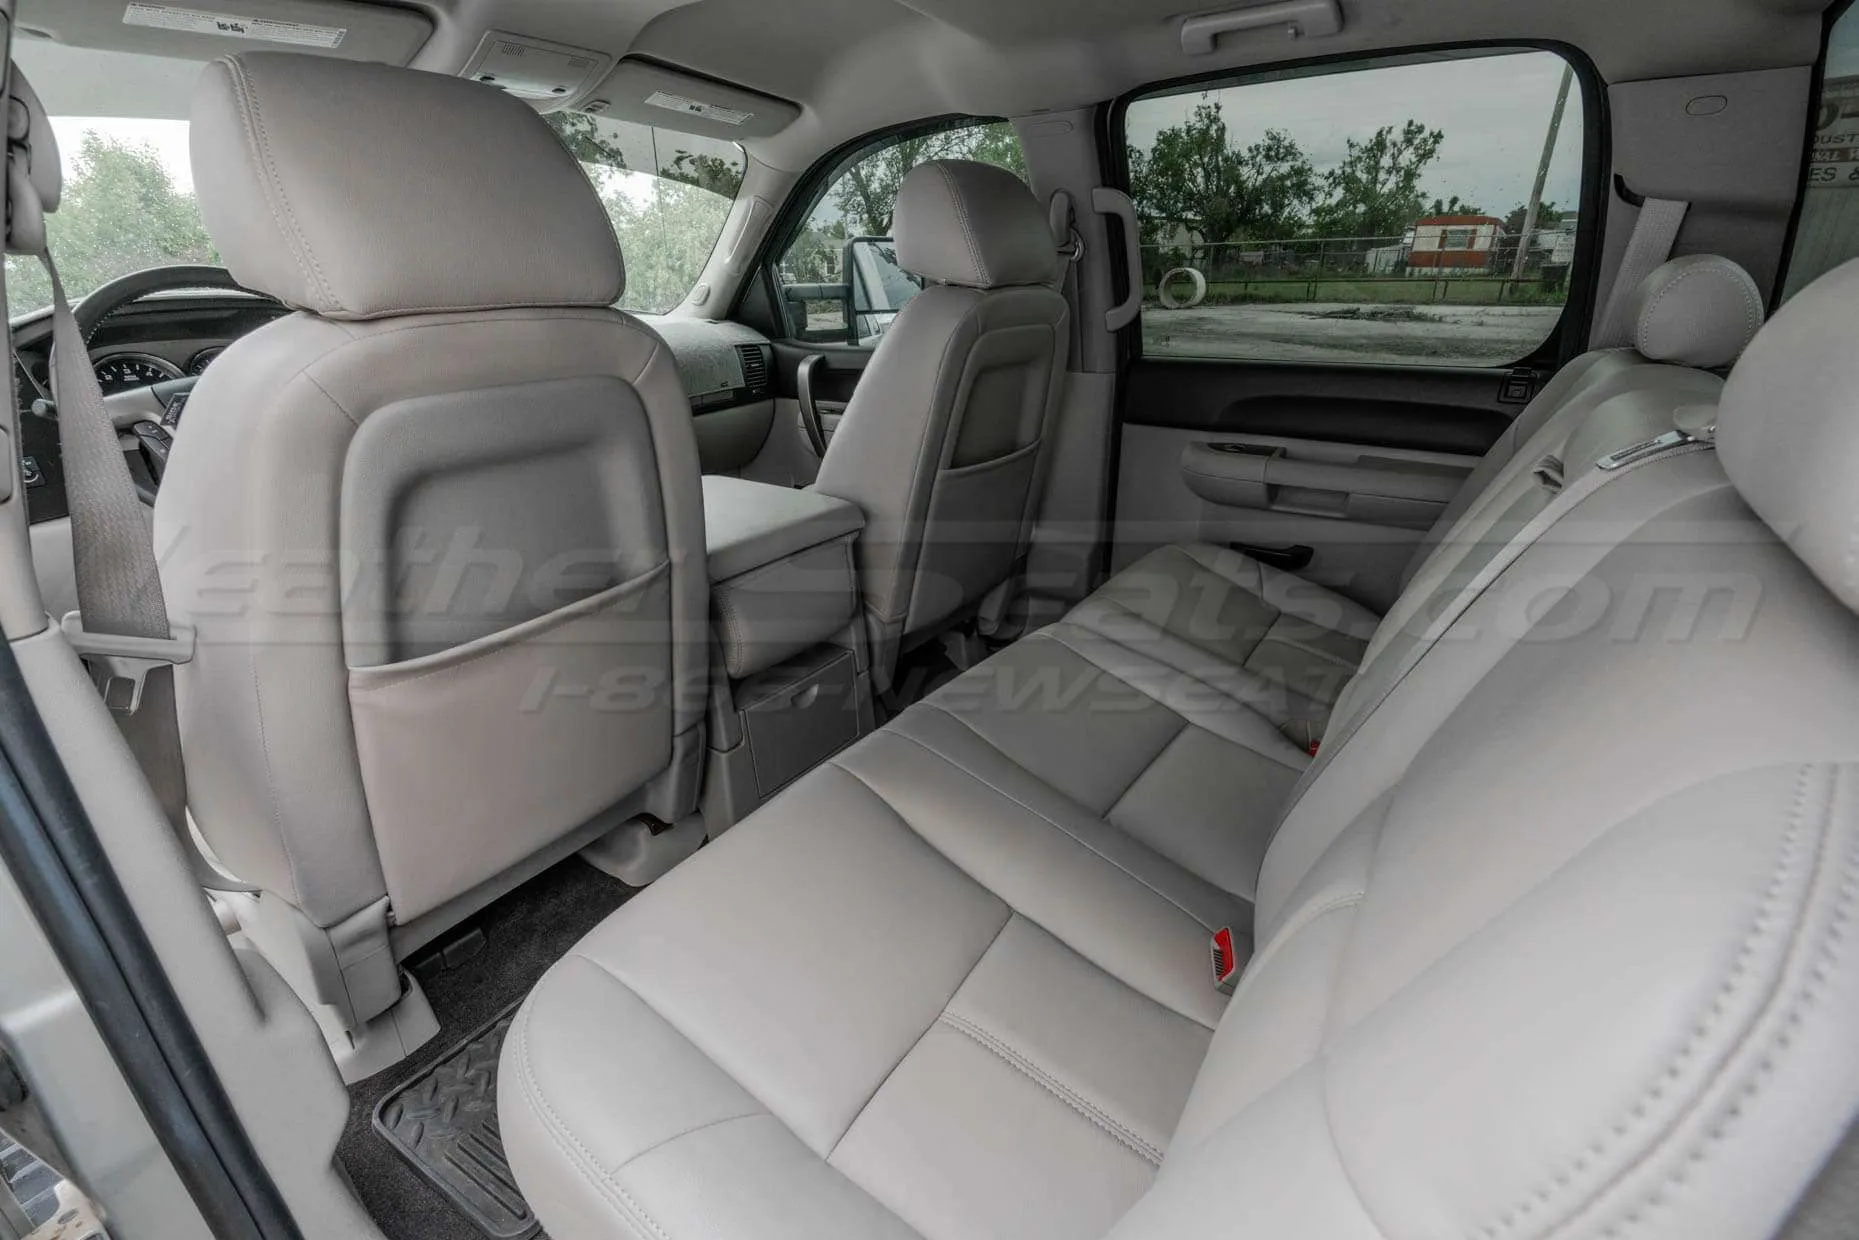 Back view of front seats with pocket